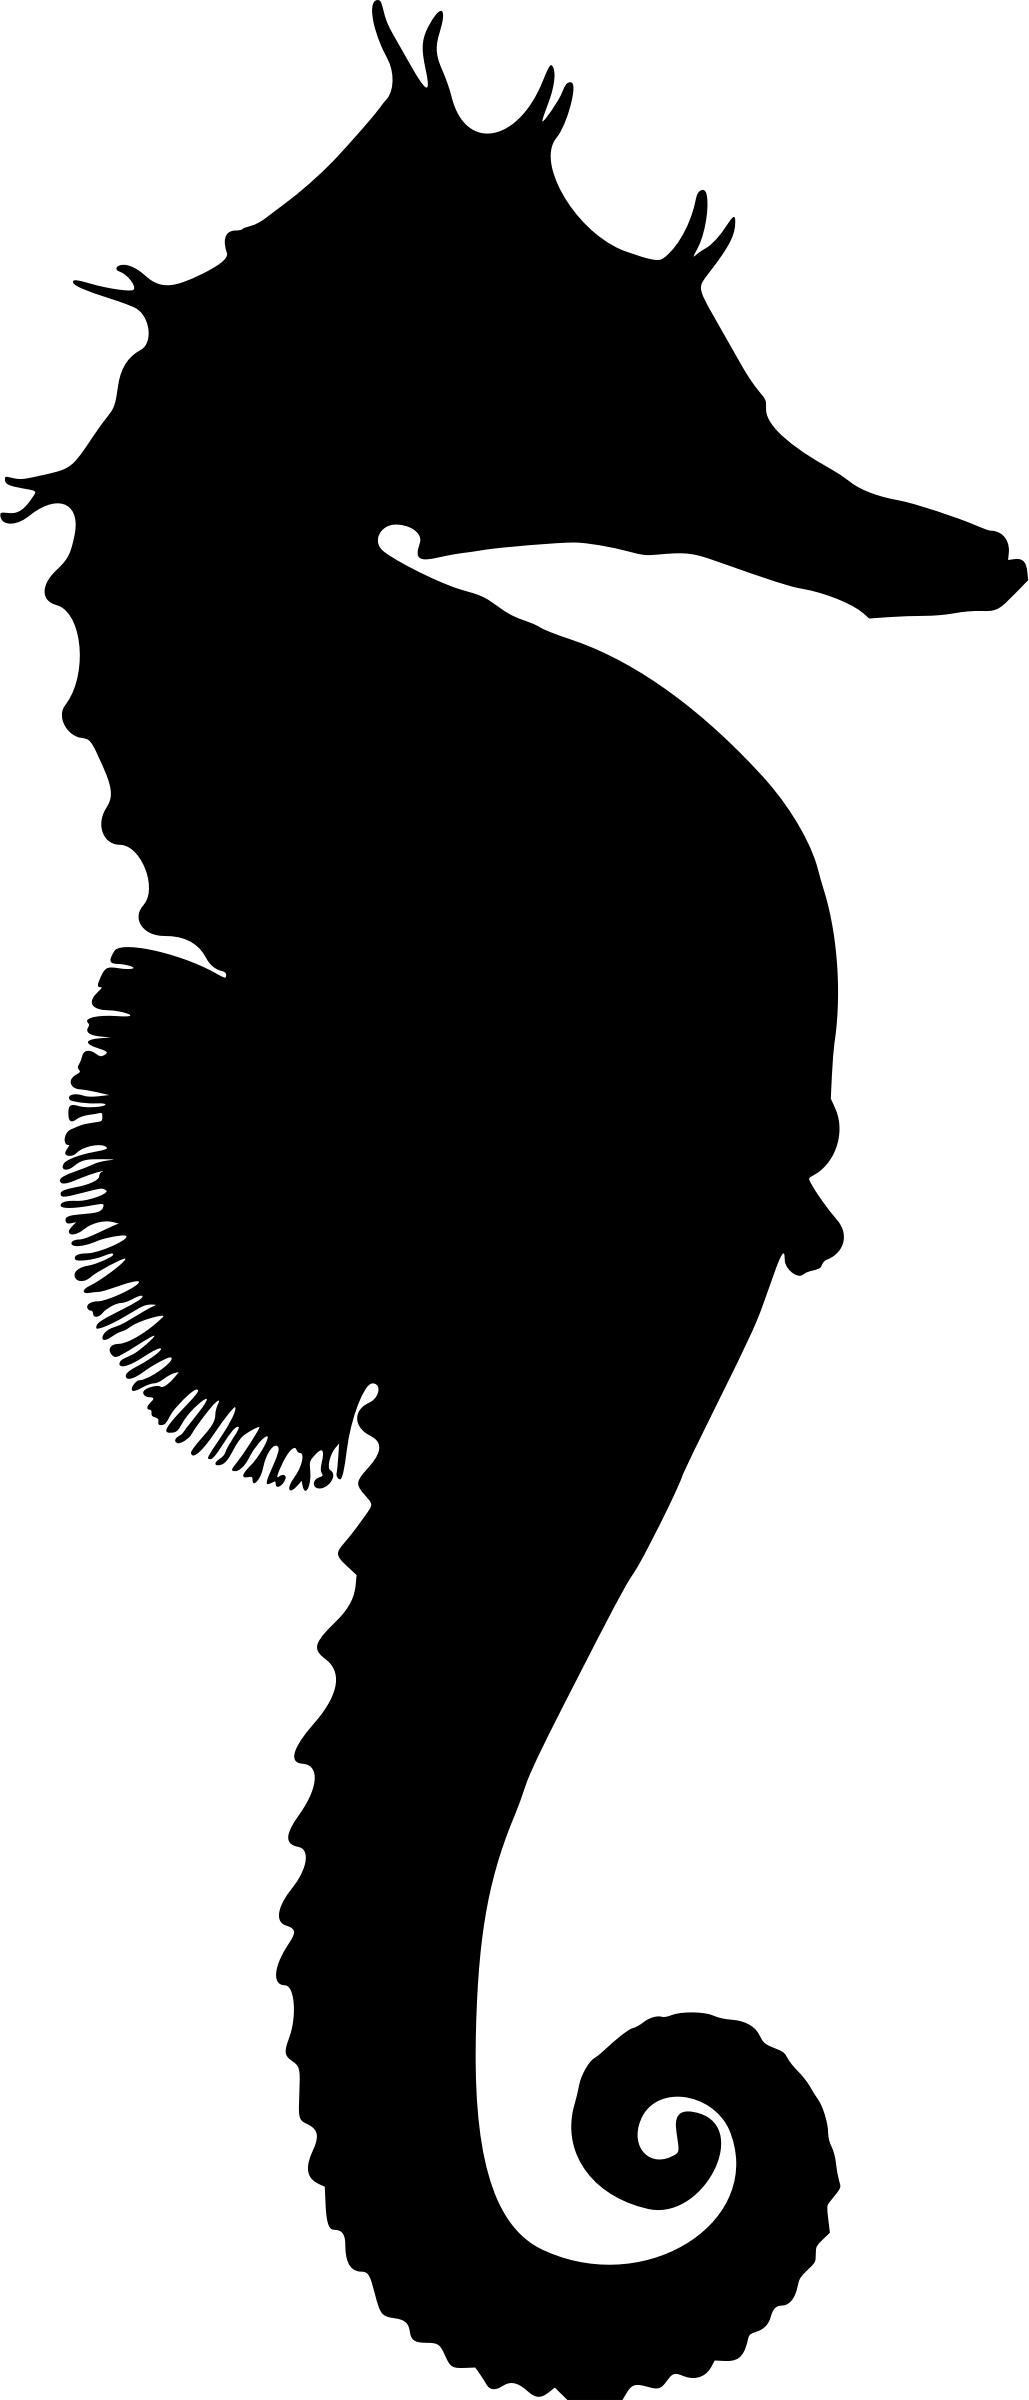 Seahorse 3 (silhouette) png transparent